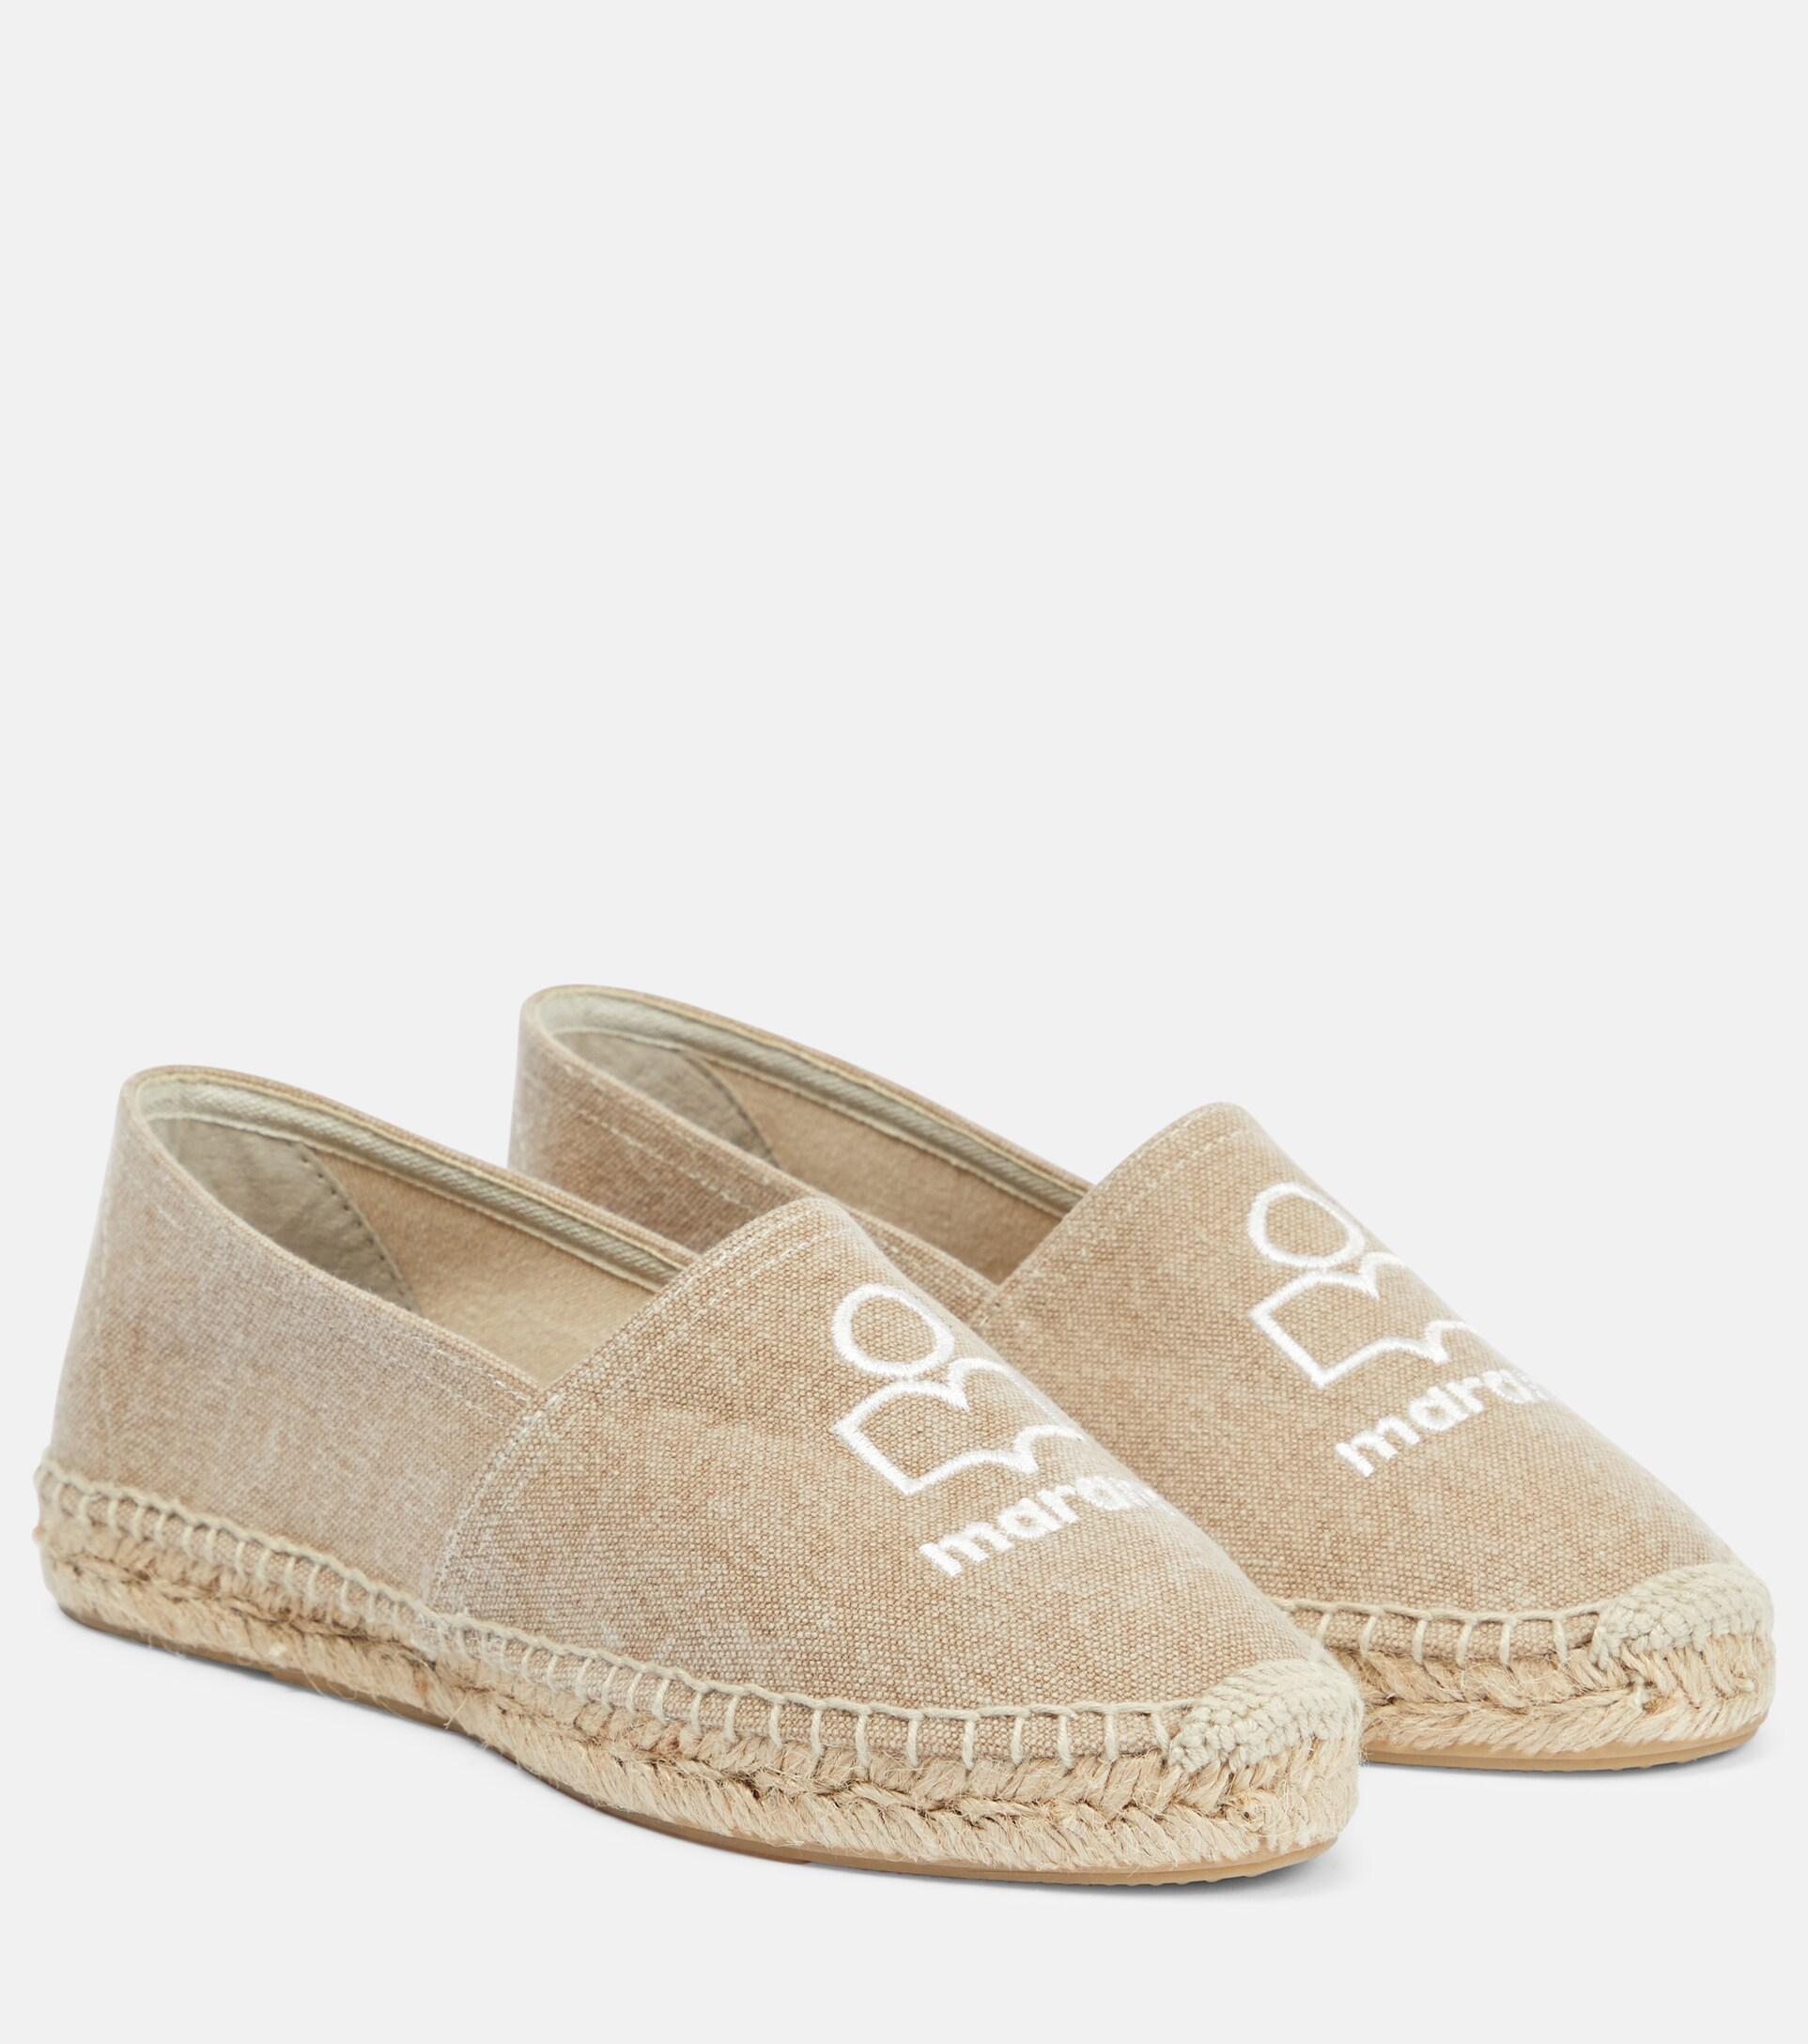 Isabel Marant Canae Logo Espadrilles in Natural | Lyst